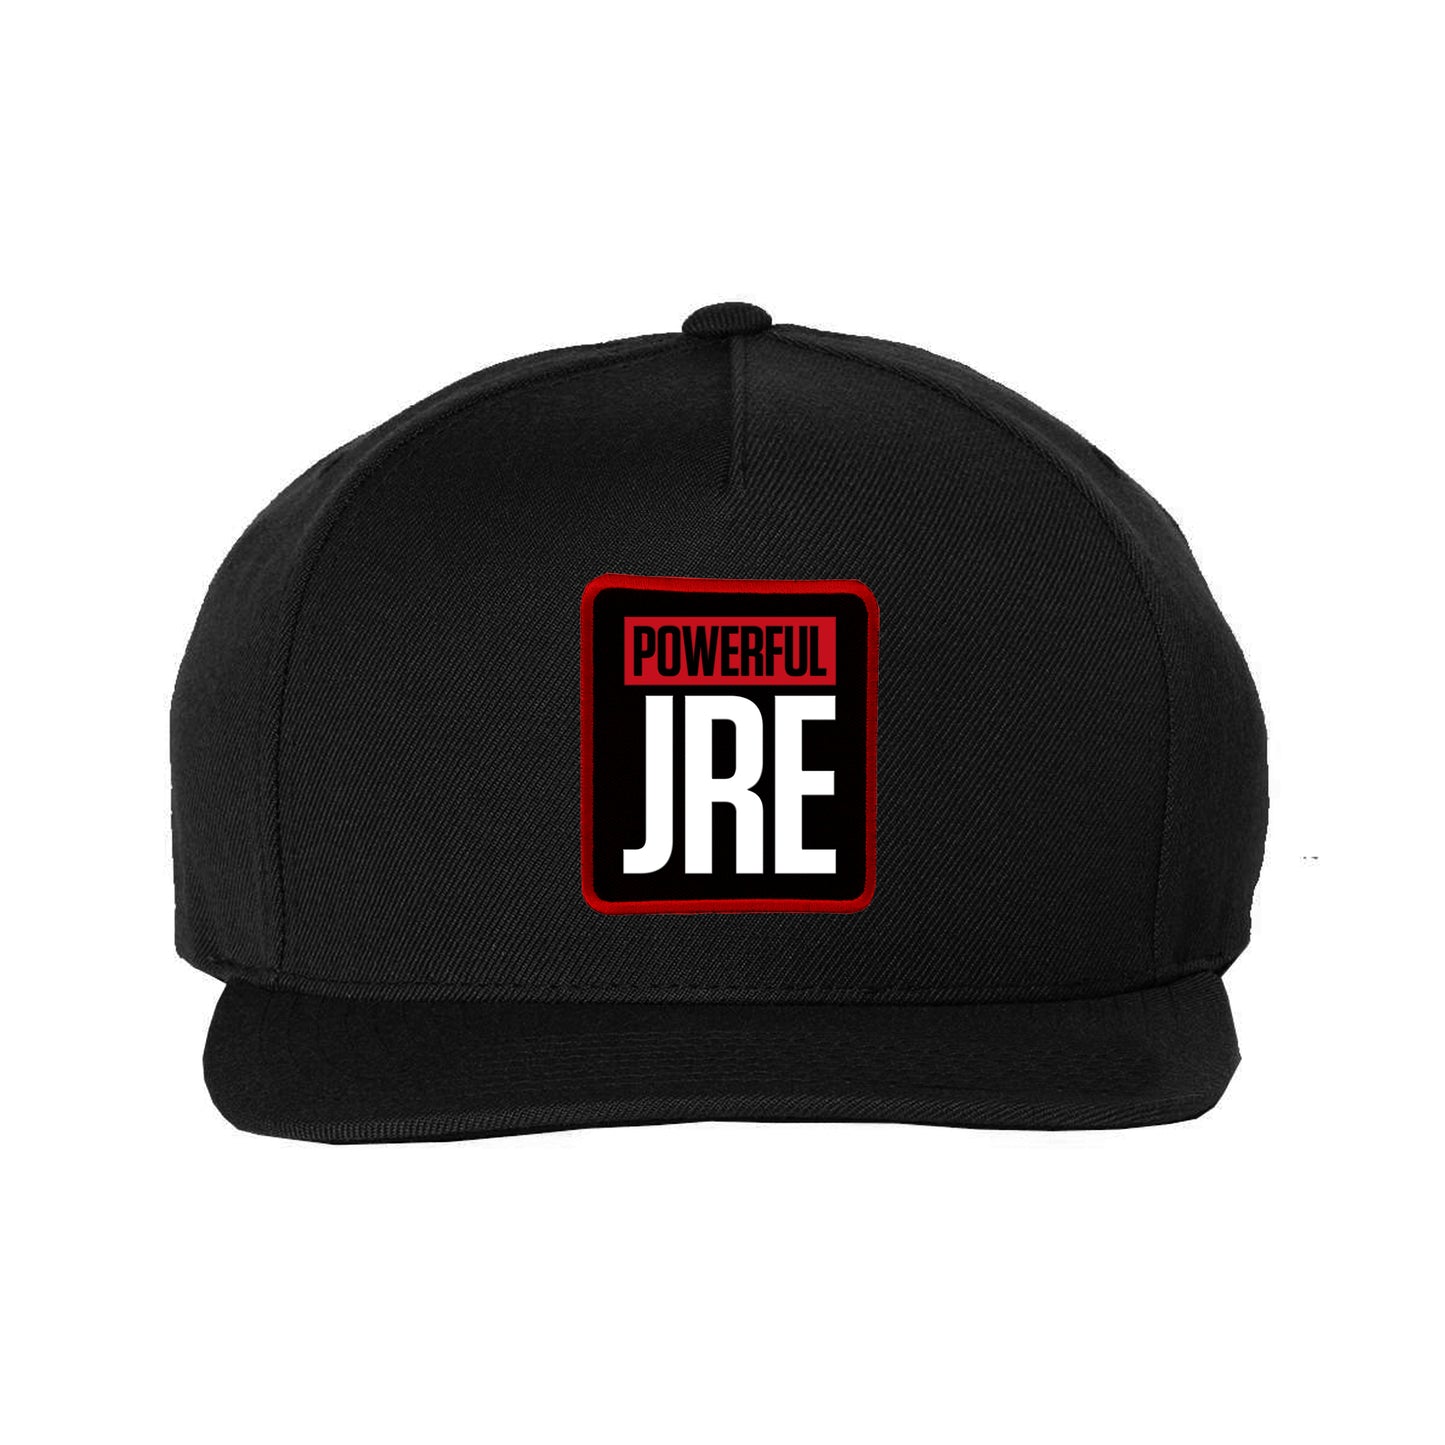 Powerful JRE Patch Hat